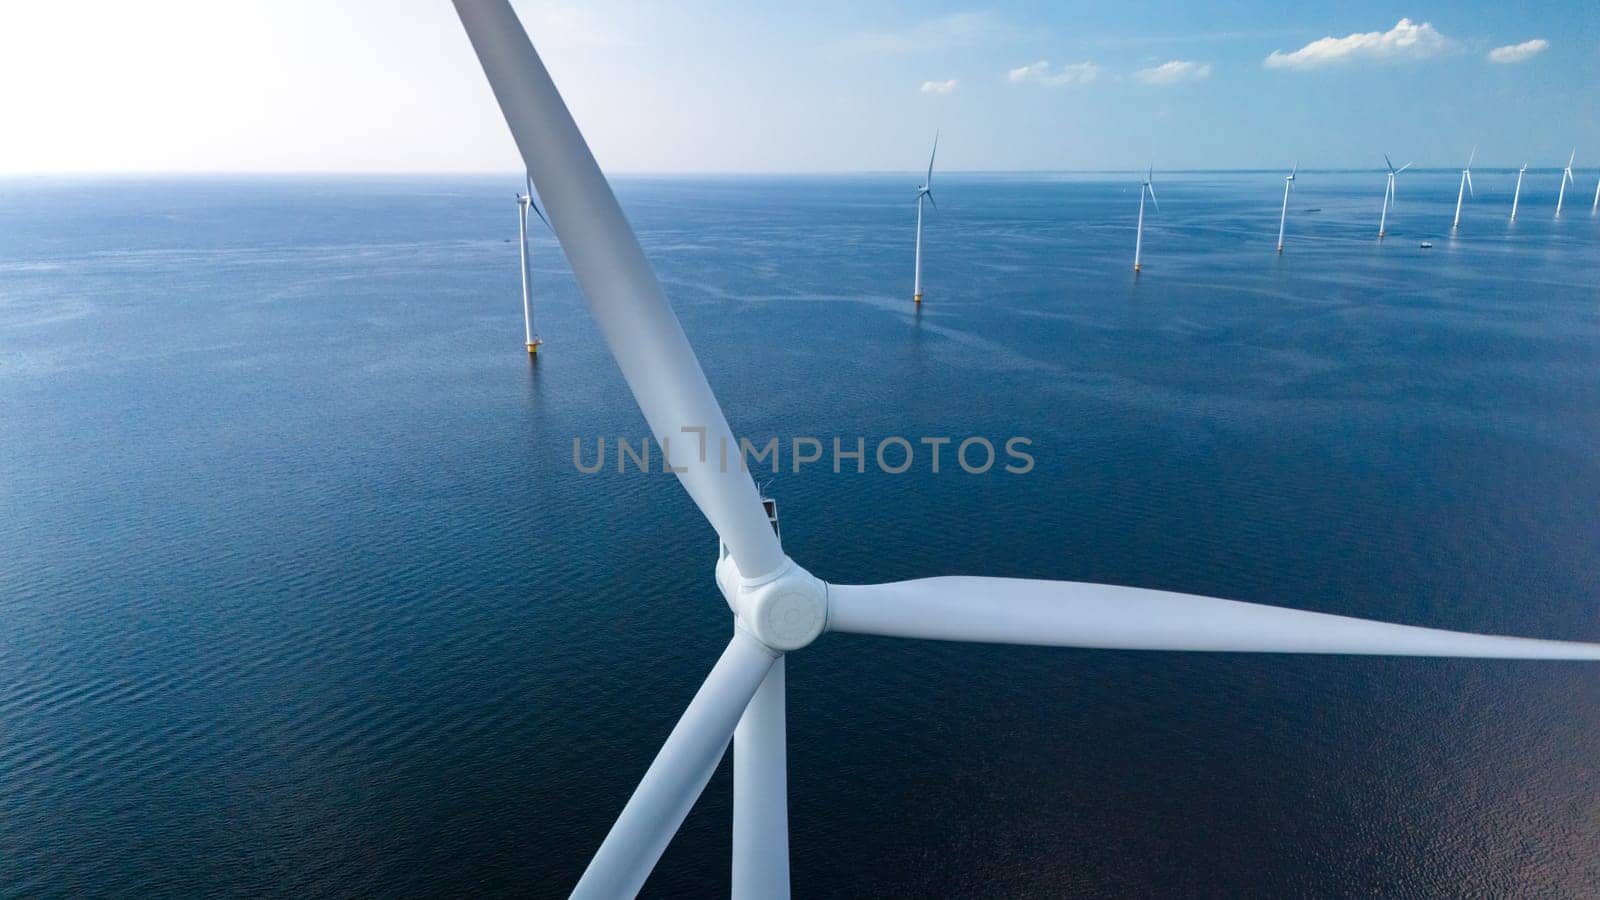 Towering windmill turbines are intricately placed in the vast ocean expanse of the Netherlands Flevoland region, harnessing the power of the wind to generate clean energy.